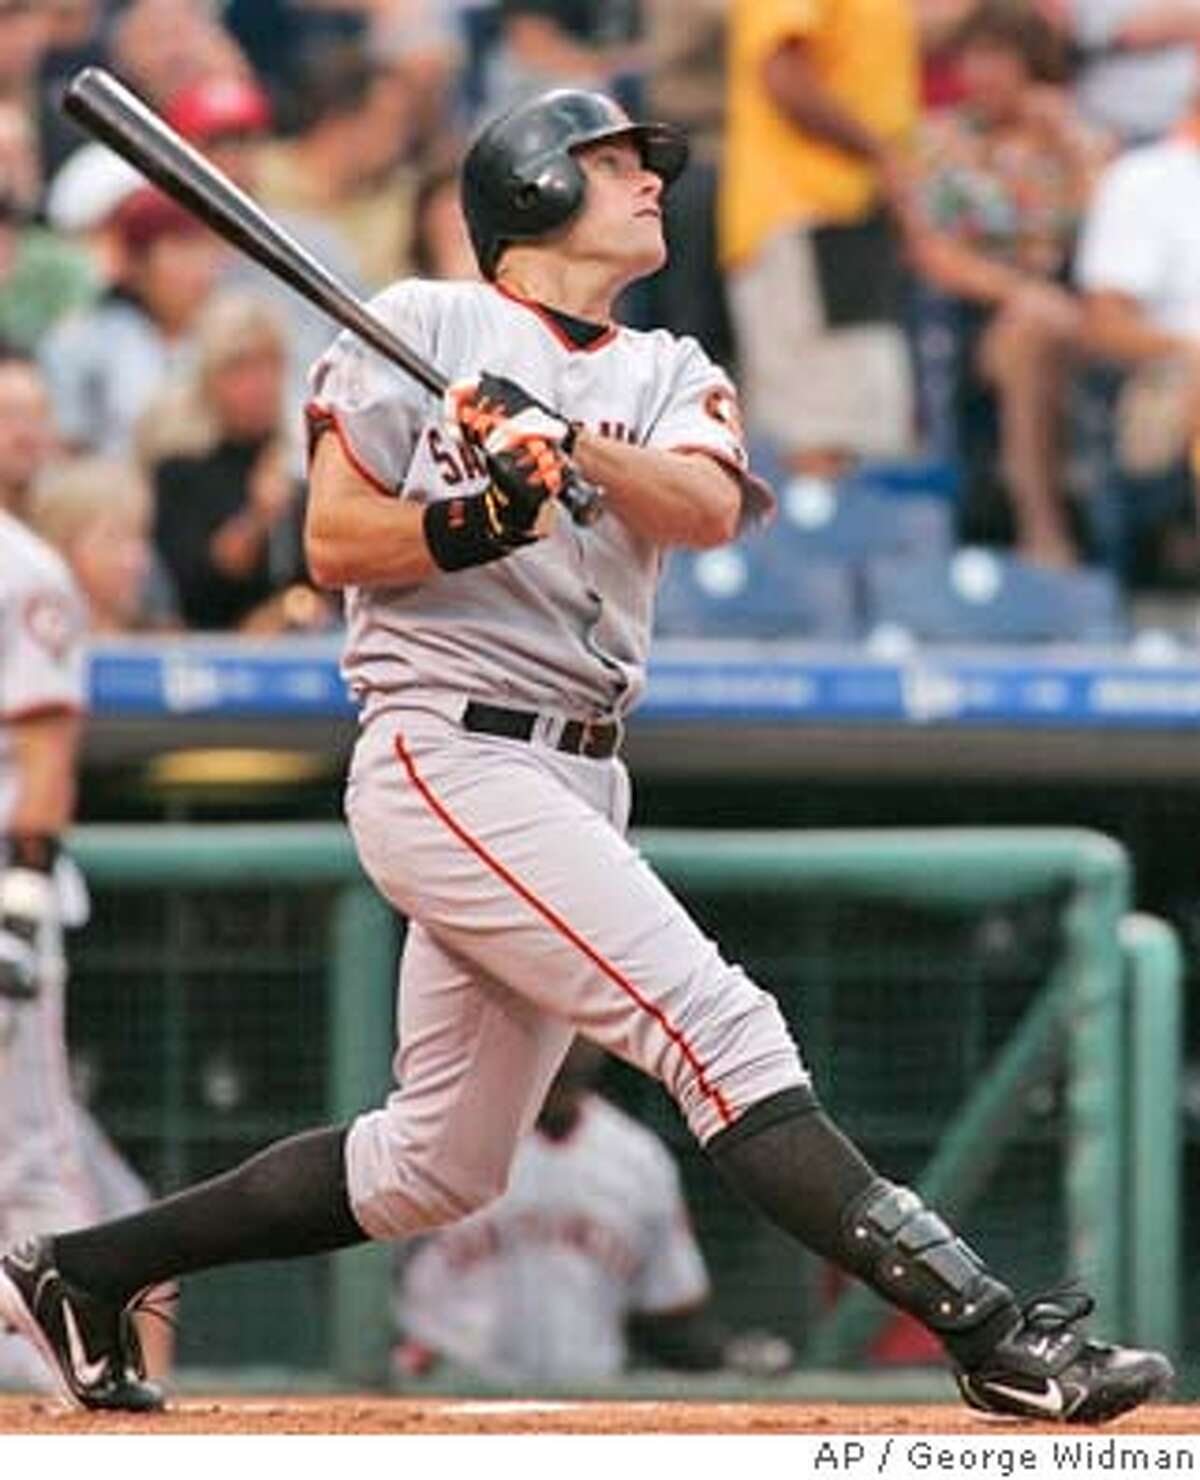 San Francisco Giants' J.T. Snow watches his two-run home run against the Philadelphia Phillies in the first inning Friday, Aug. 13, 2004, in Philadelphia. (AP Photo/George Widman)